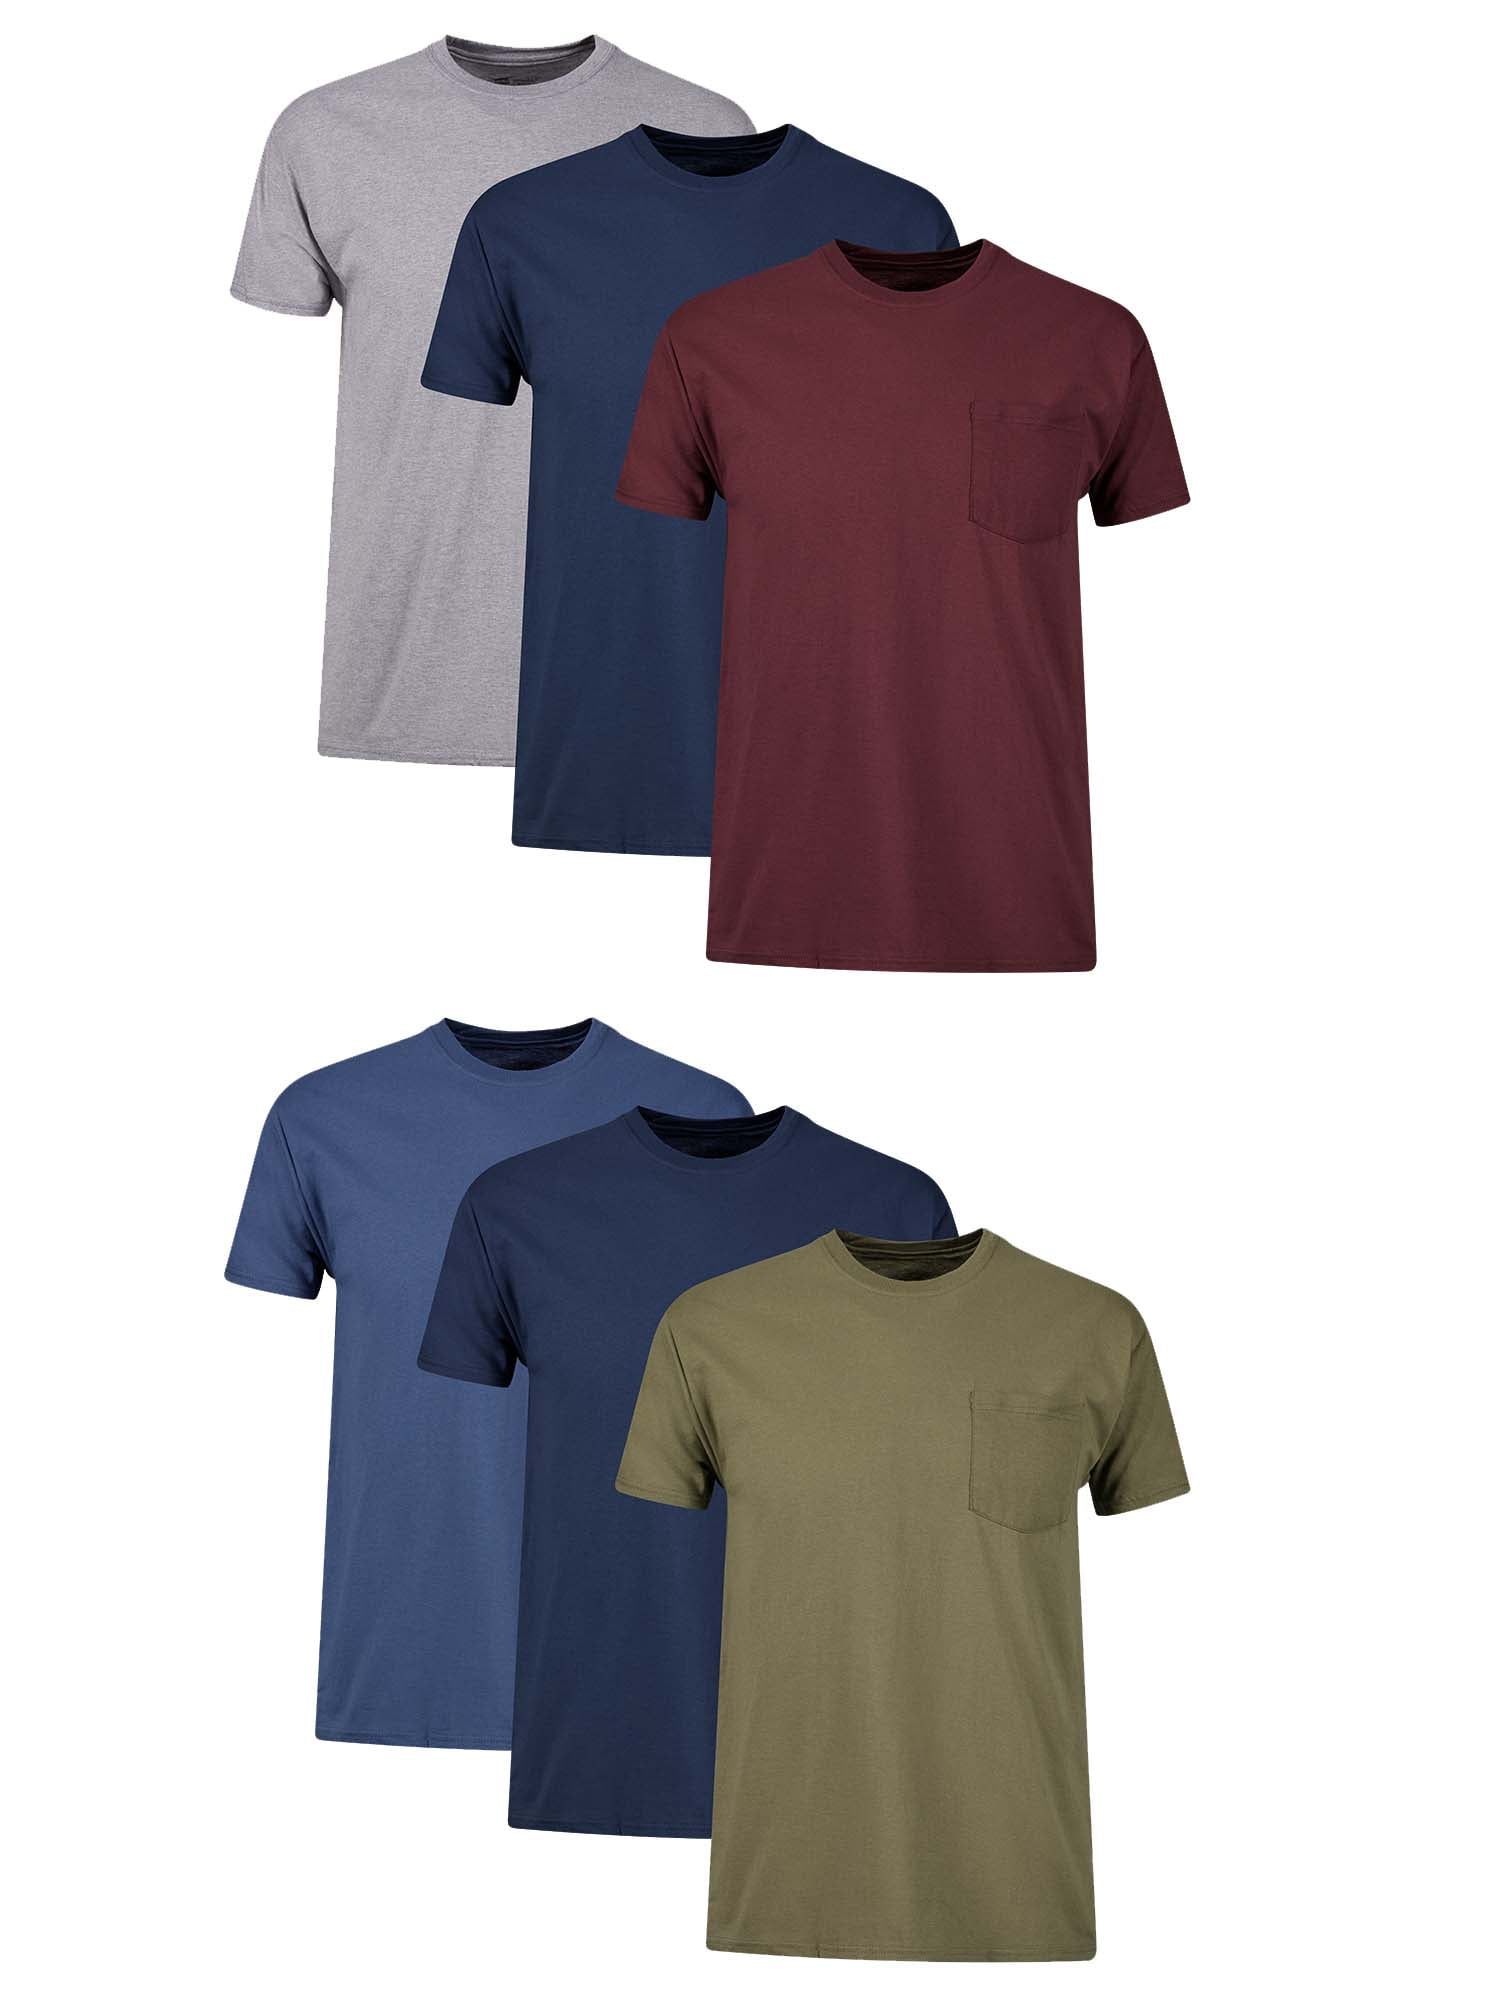 Assorted, Fruit of the Loom Mens 5-Pack Pocket T-Shirt